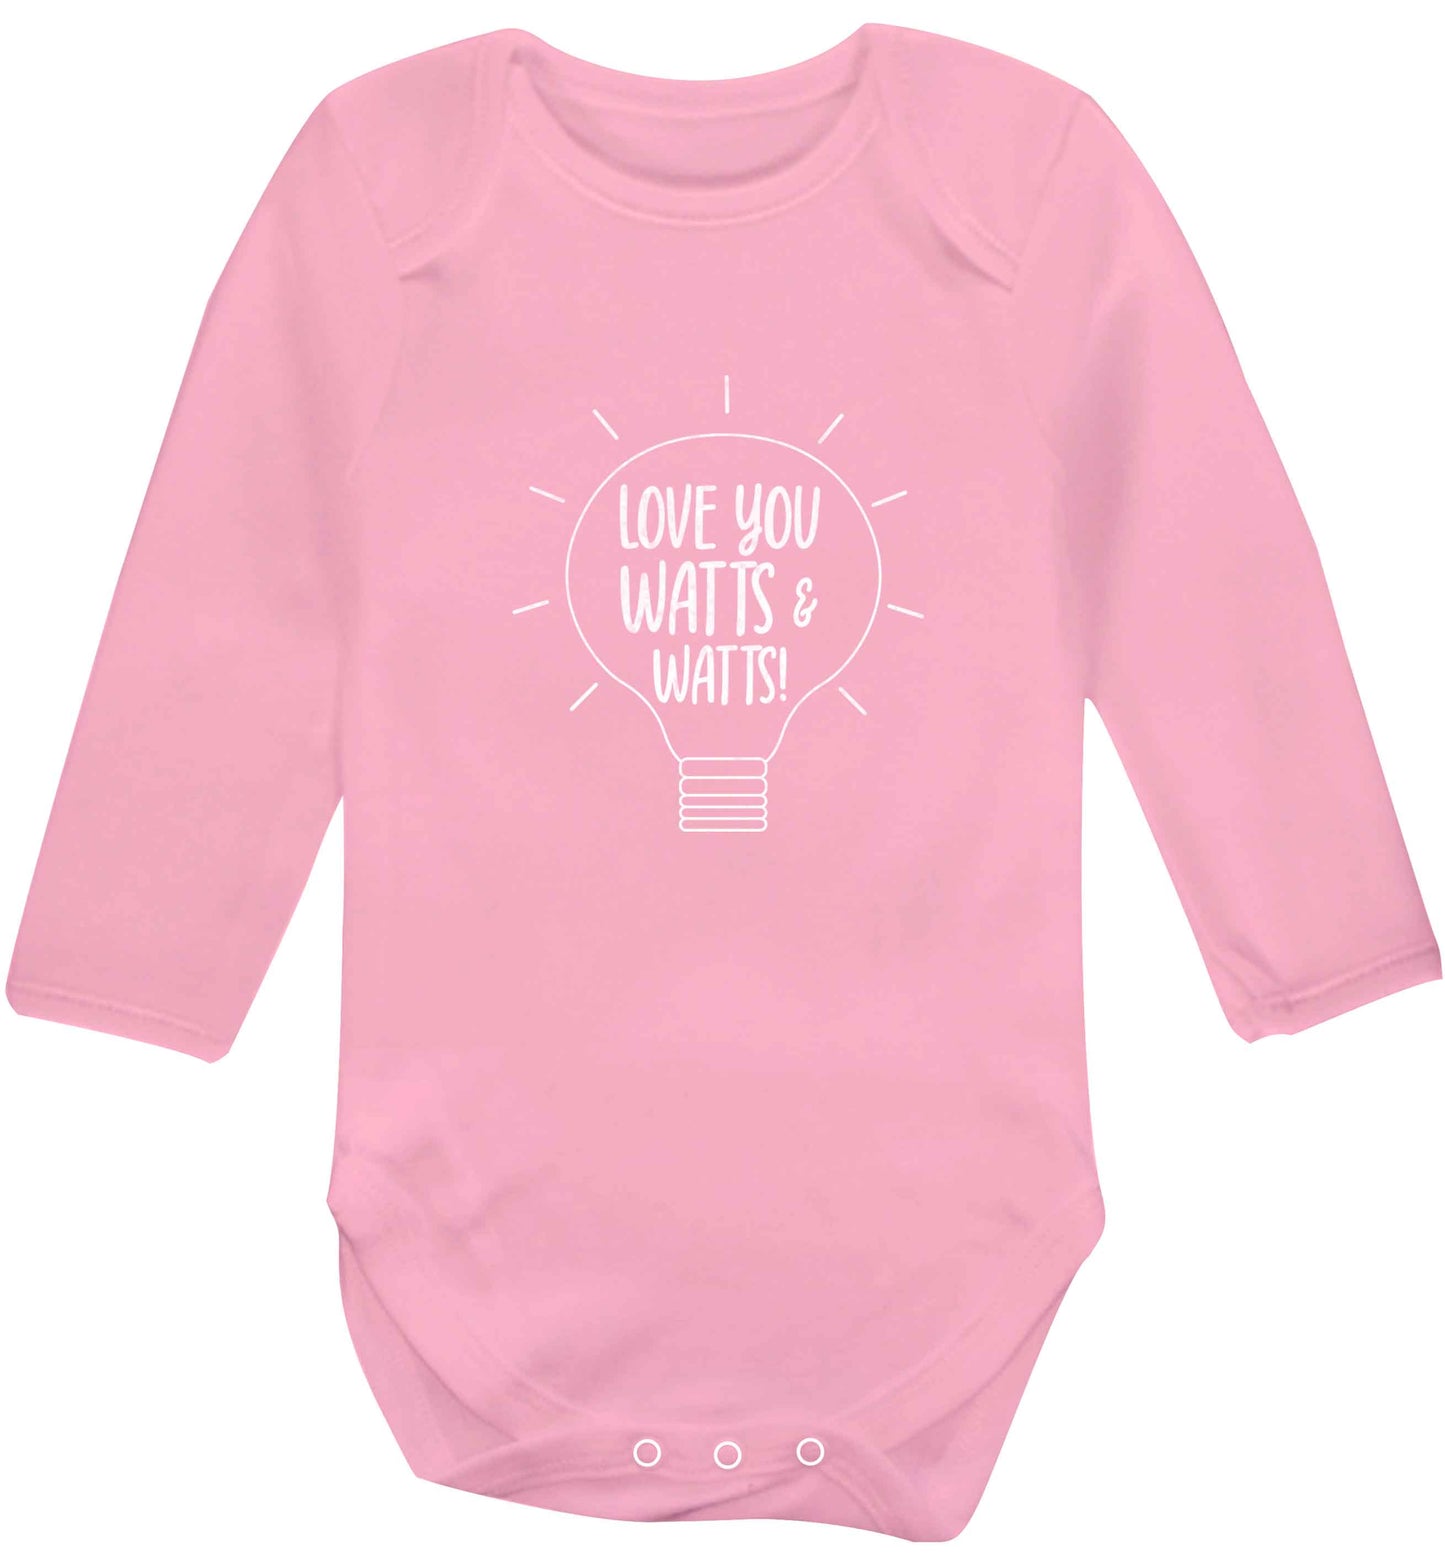 I love you watts and watts baby vest long sleeved pale pink 6-12 months